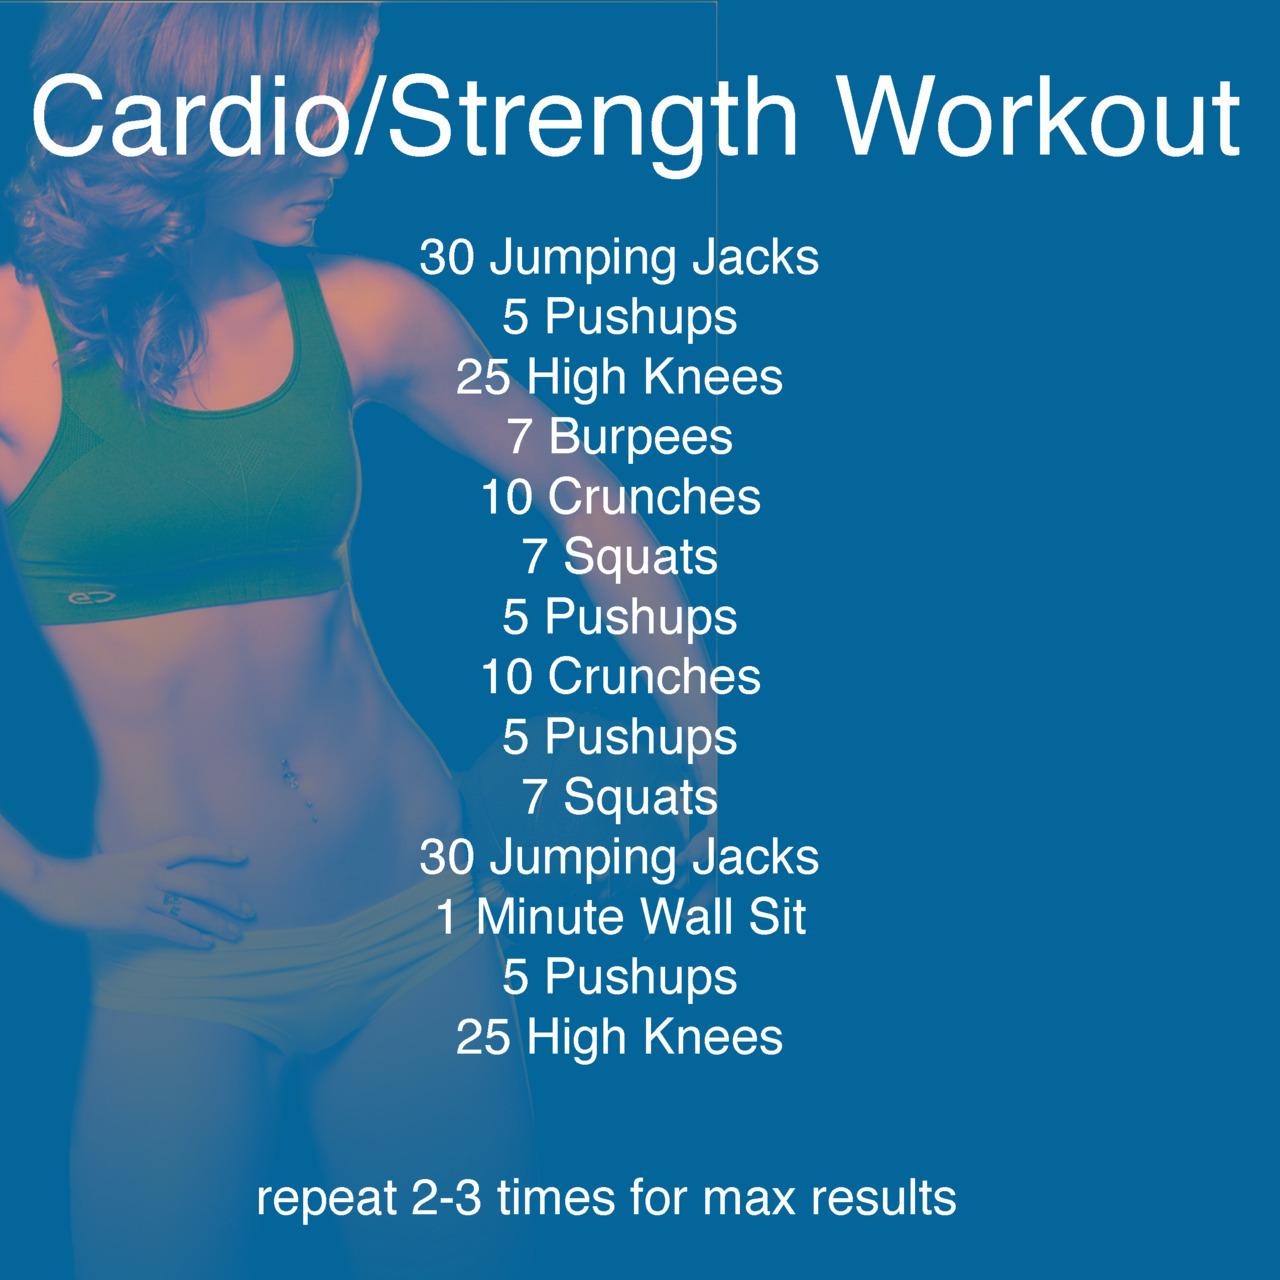 You guys were loving that workout circuit I posted yesterday. Here&#8217;s another one with a little more intensity, since it combines cardio and strength training! (Cardio burns fat. Strength training builds muscle) Remember that 3 rounds means 3 times back to back, with 30 second breaks in between each.
P.S. If you don&#8217;t know the exercise, type the name into YouTube and you&#8217;ll see tons of videos showing you the proper form!